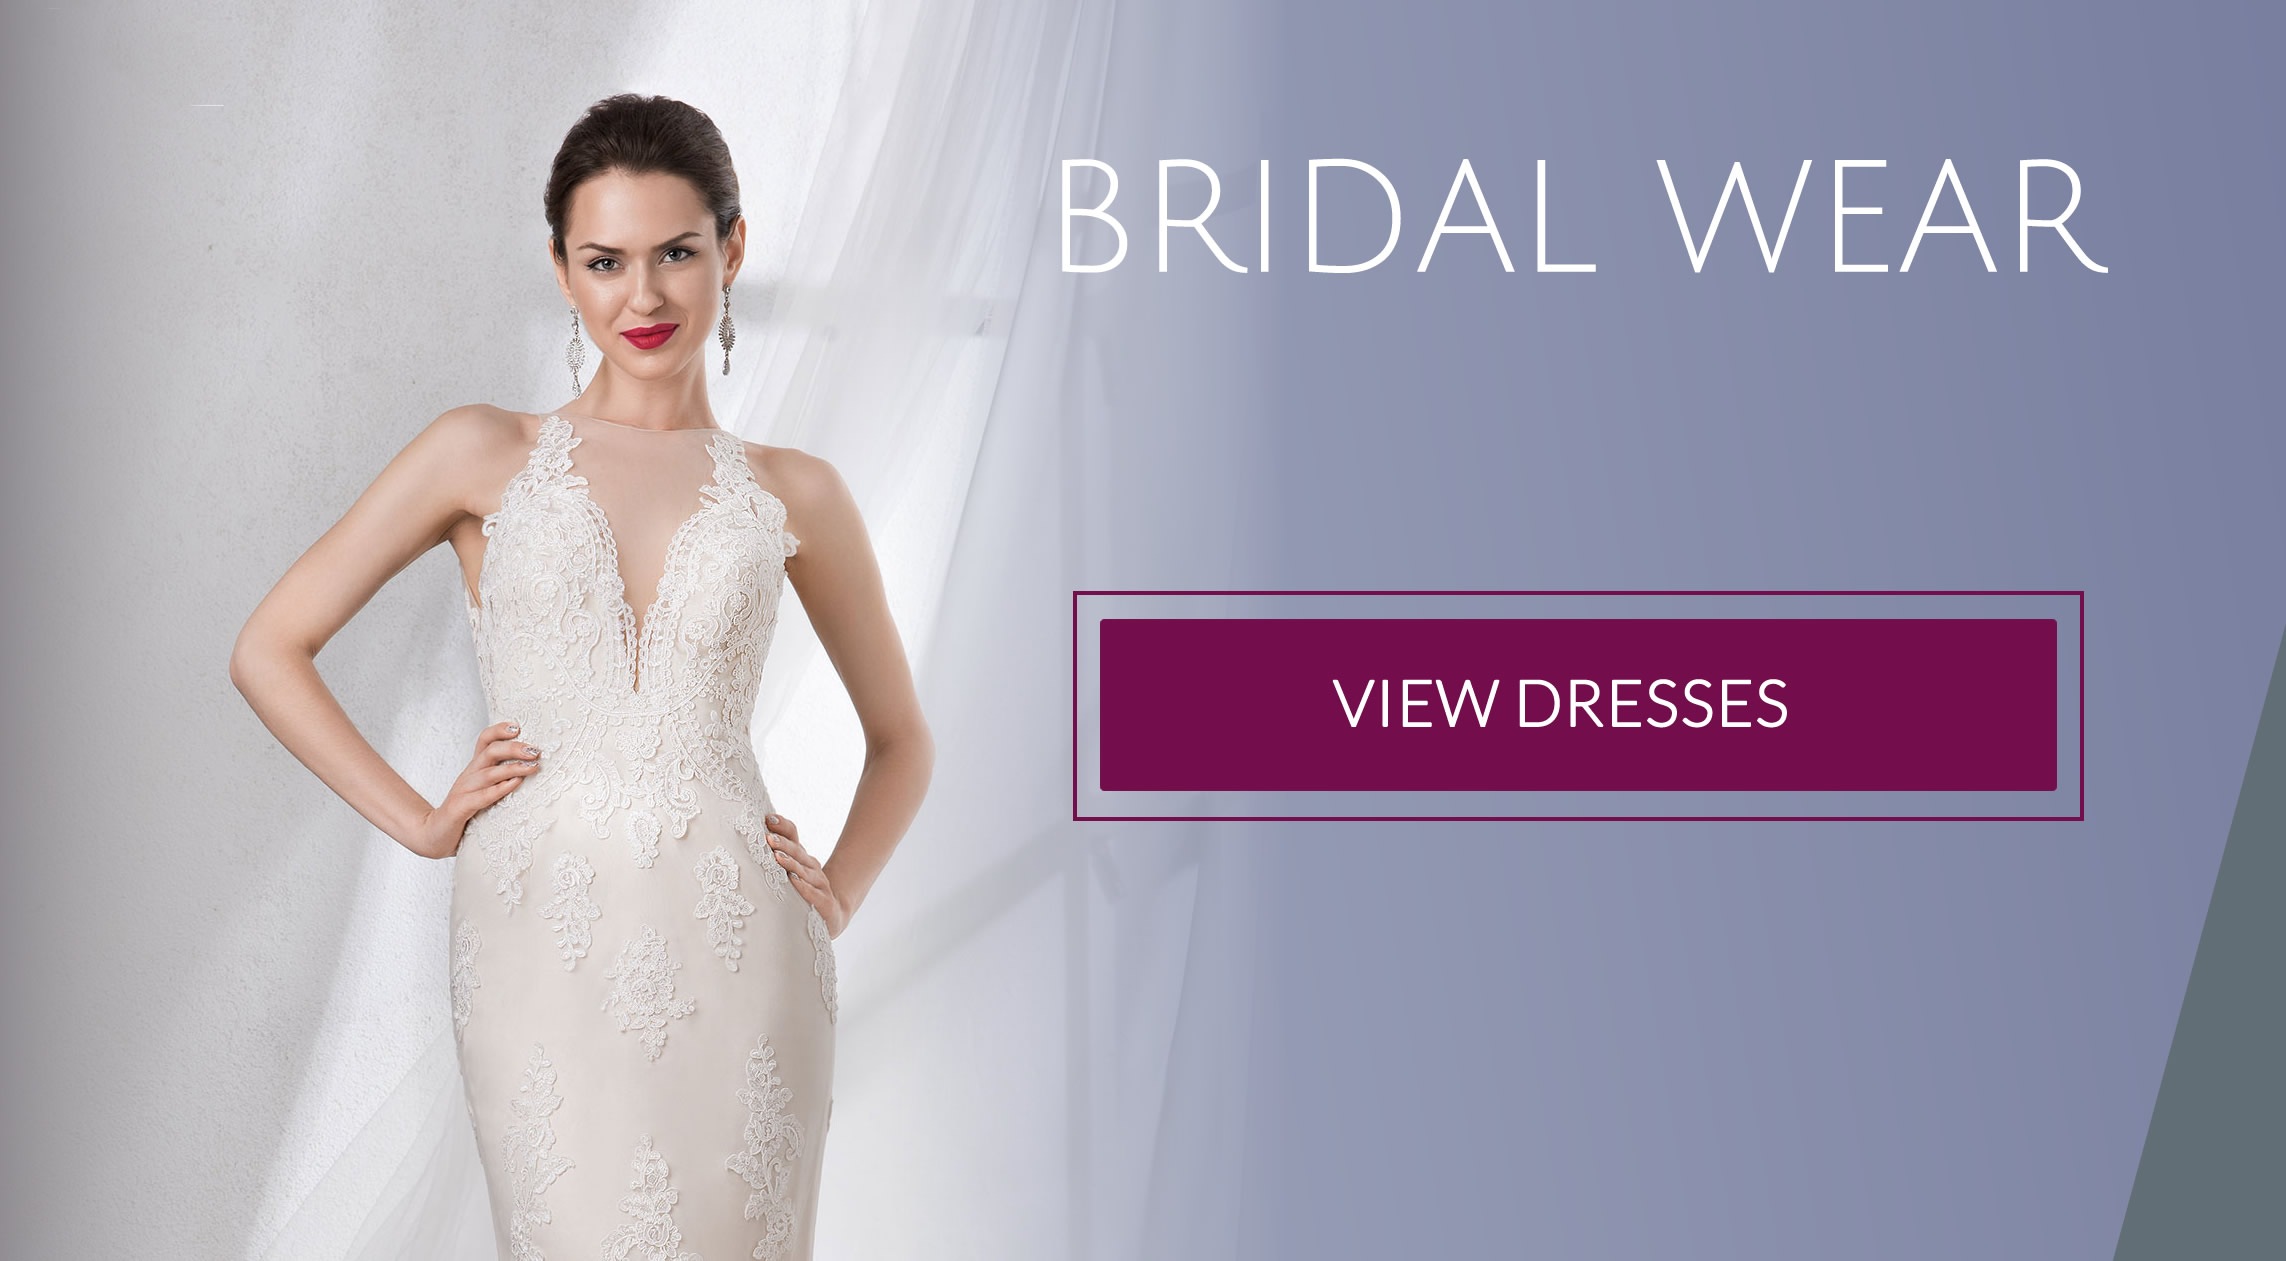 View Our Bridalwear Dresses